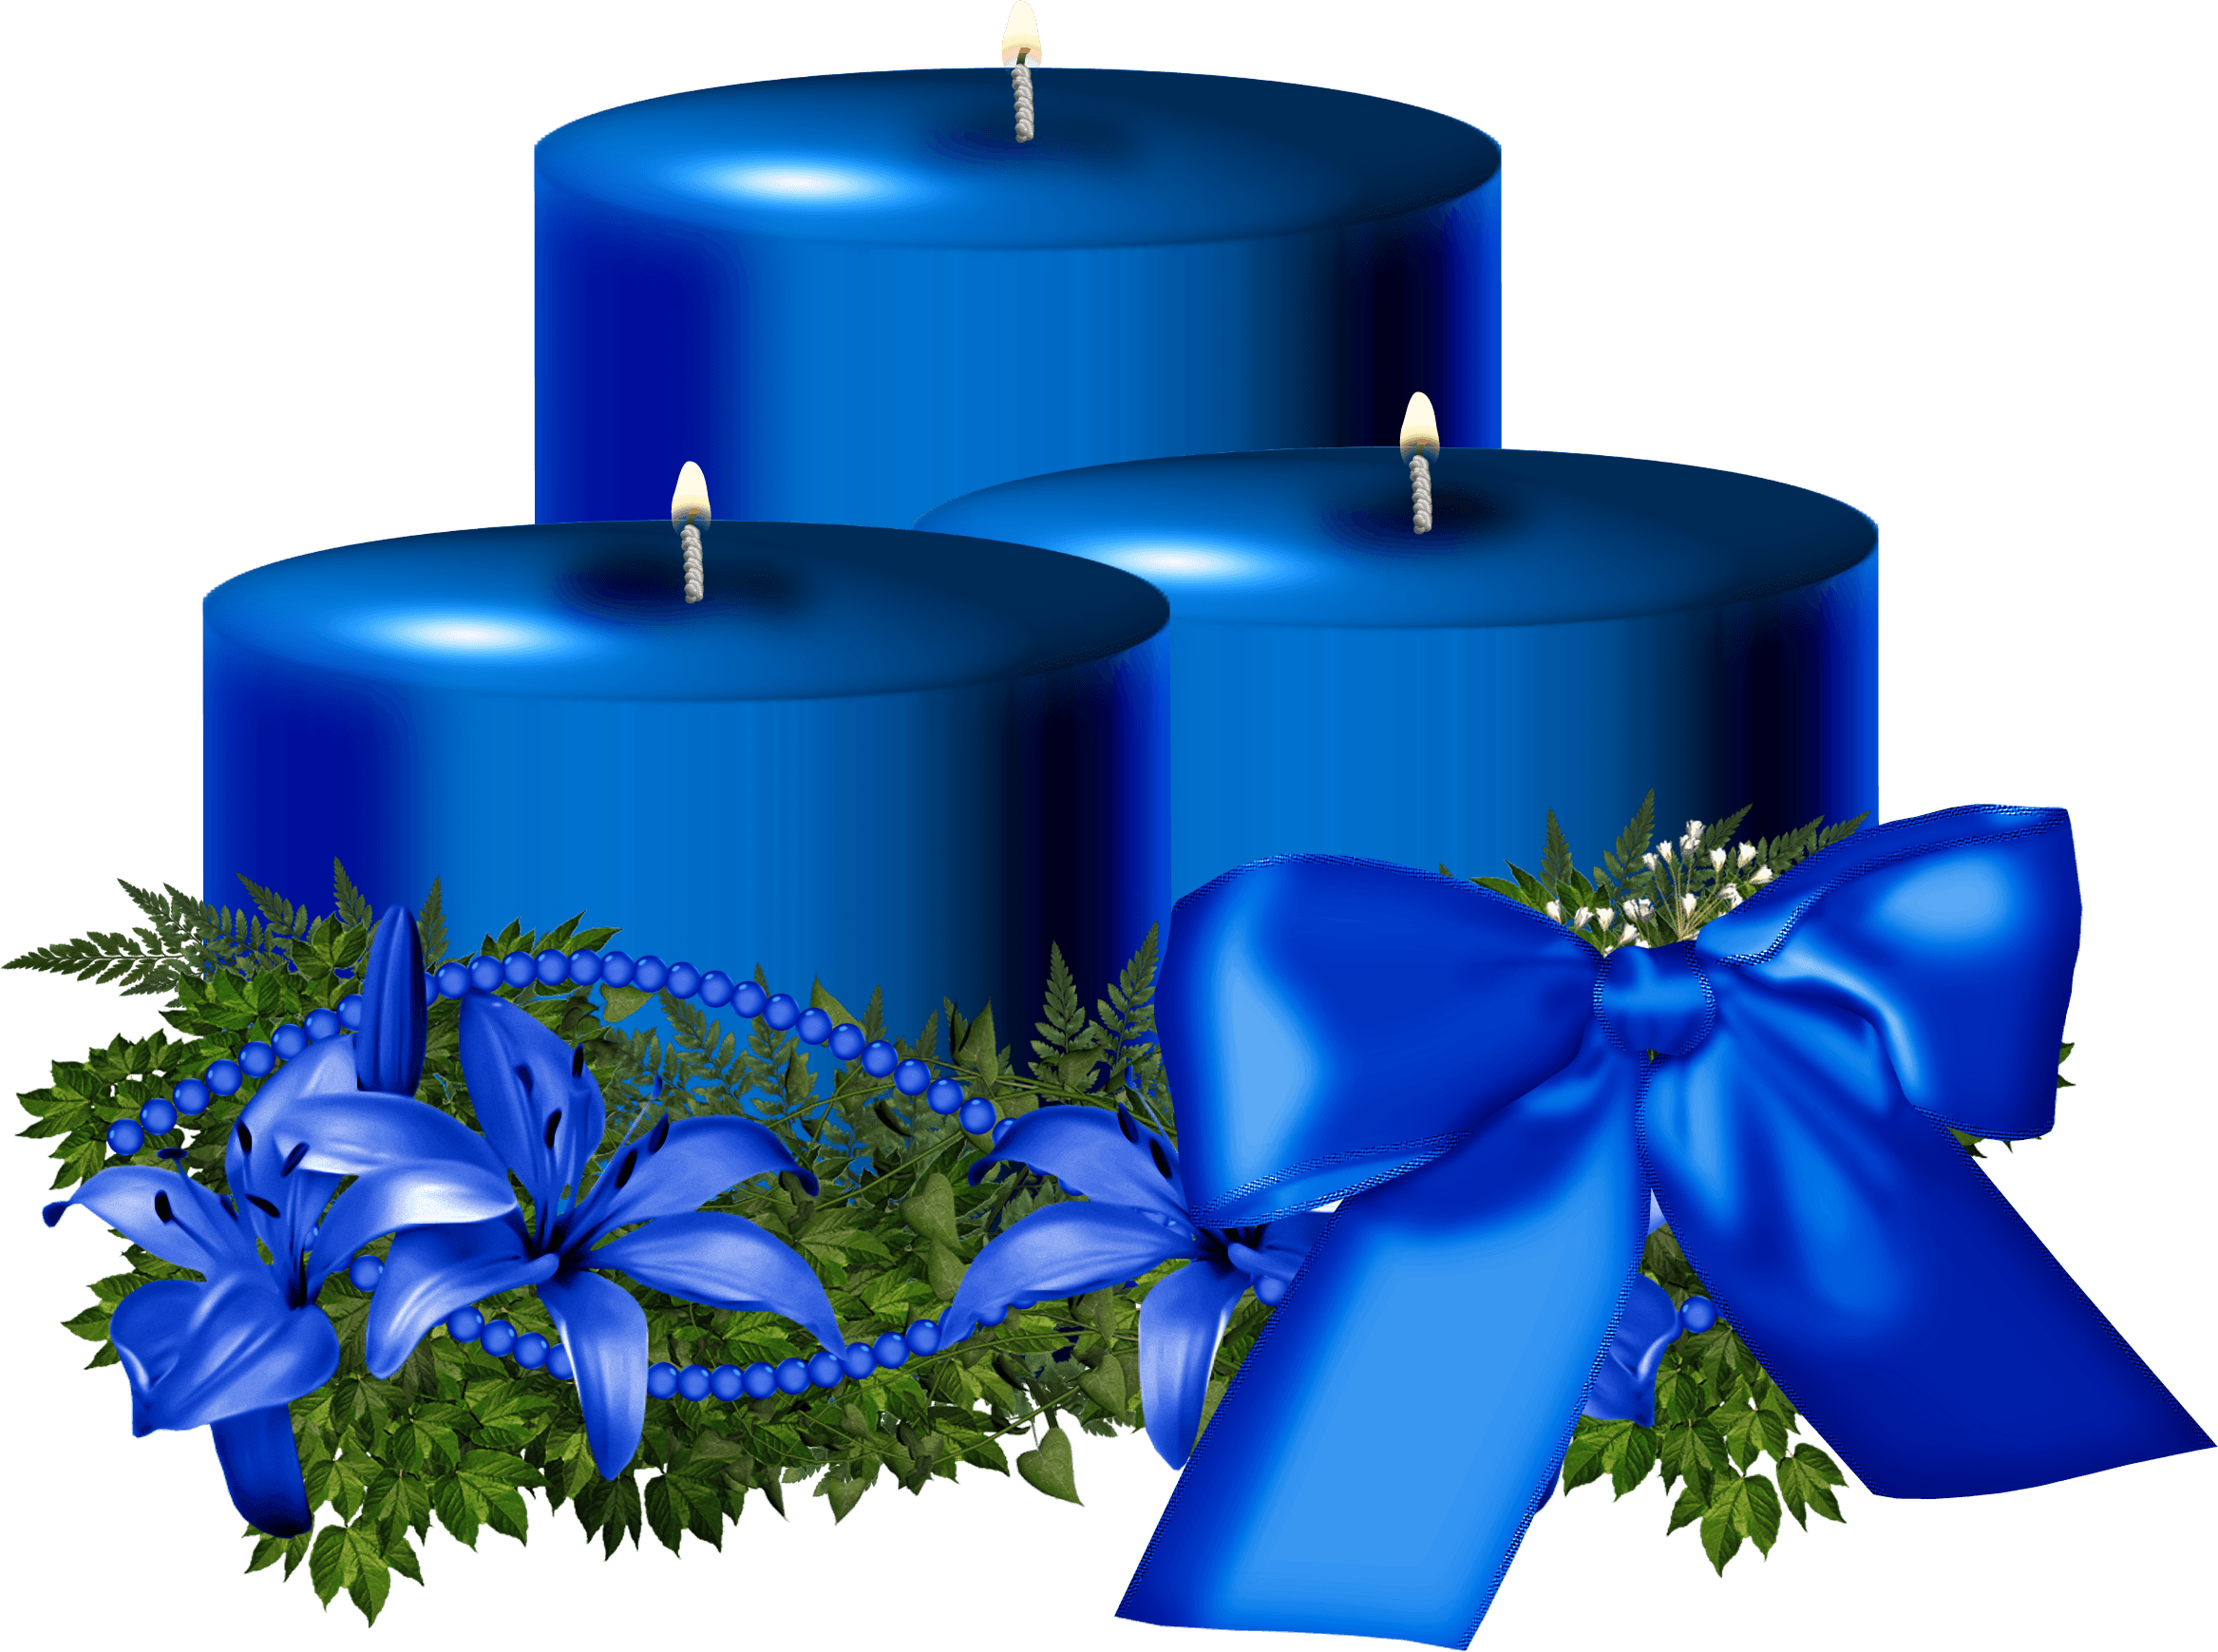 Candle Png Image PNG Image